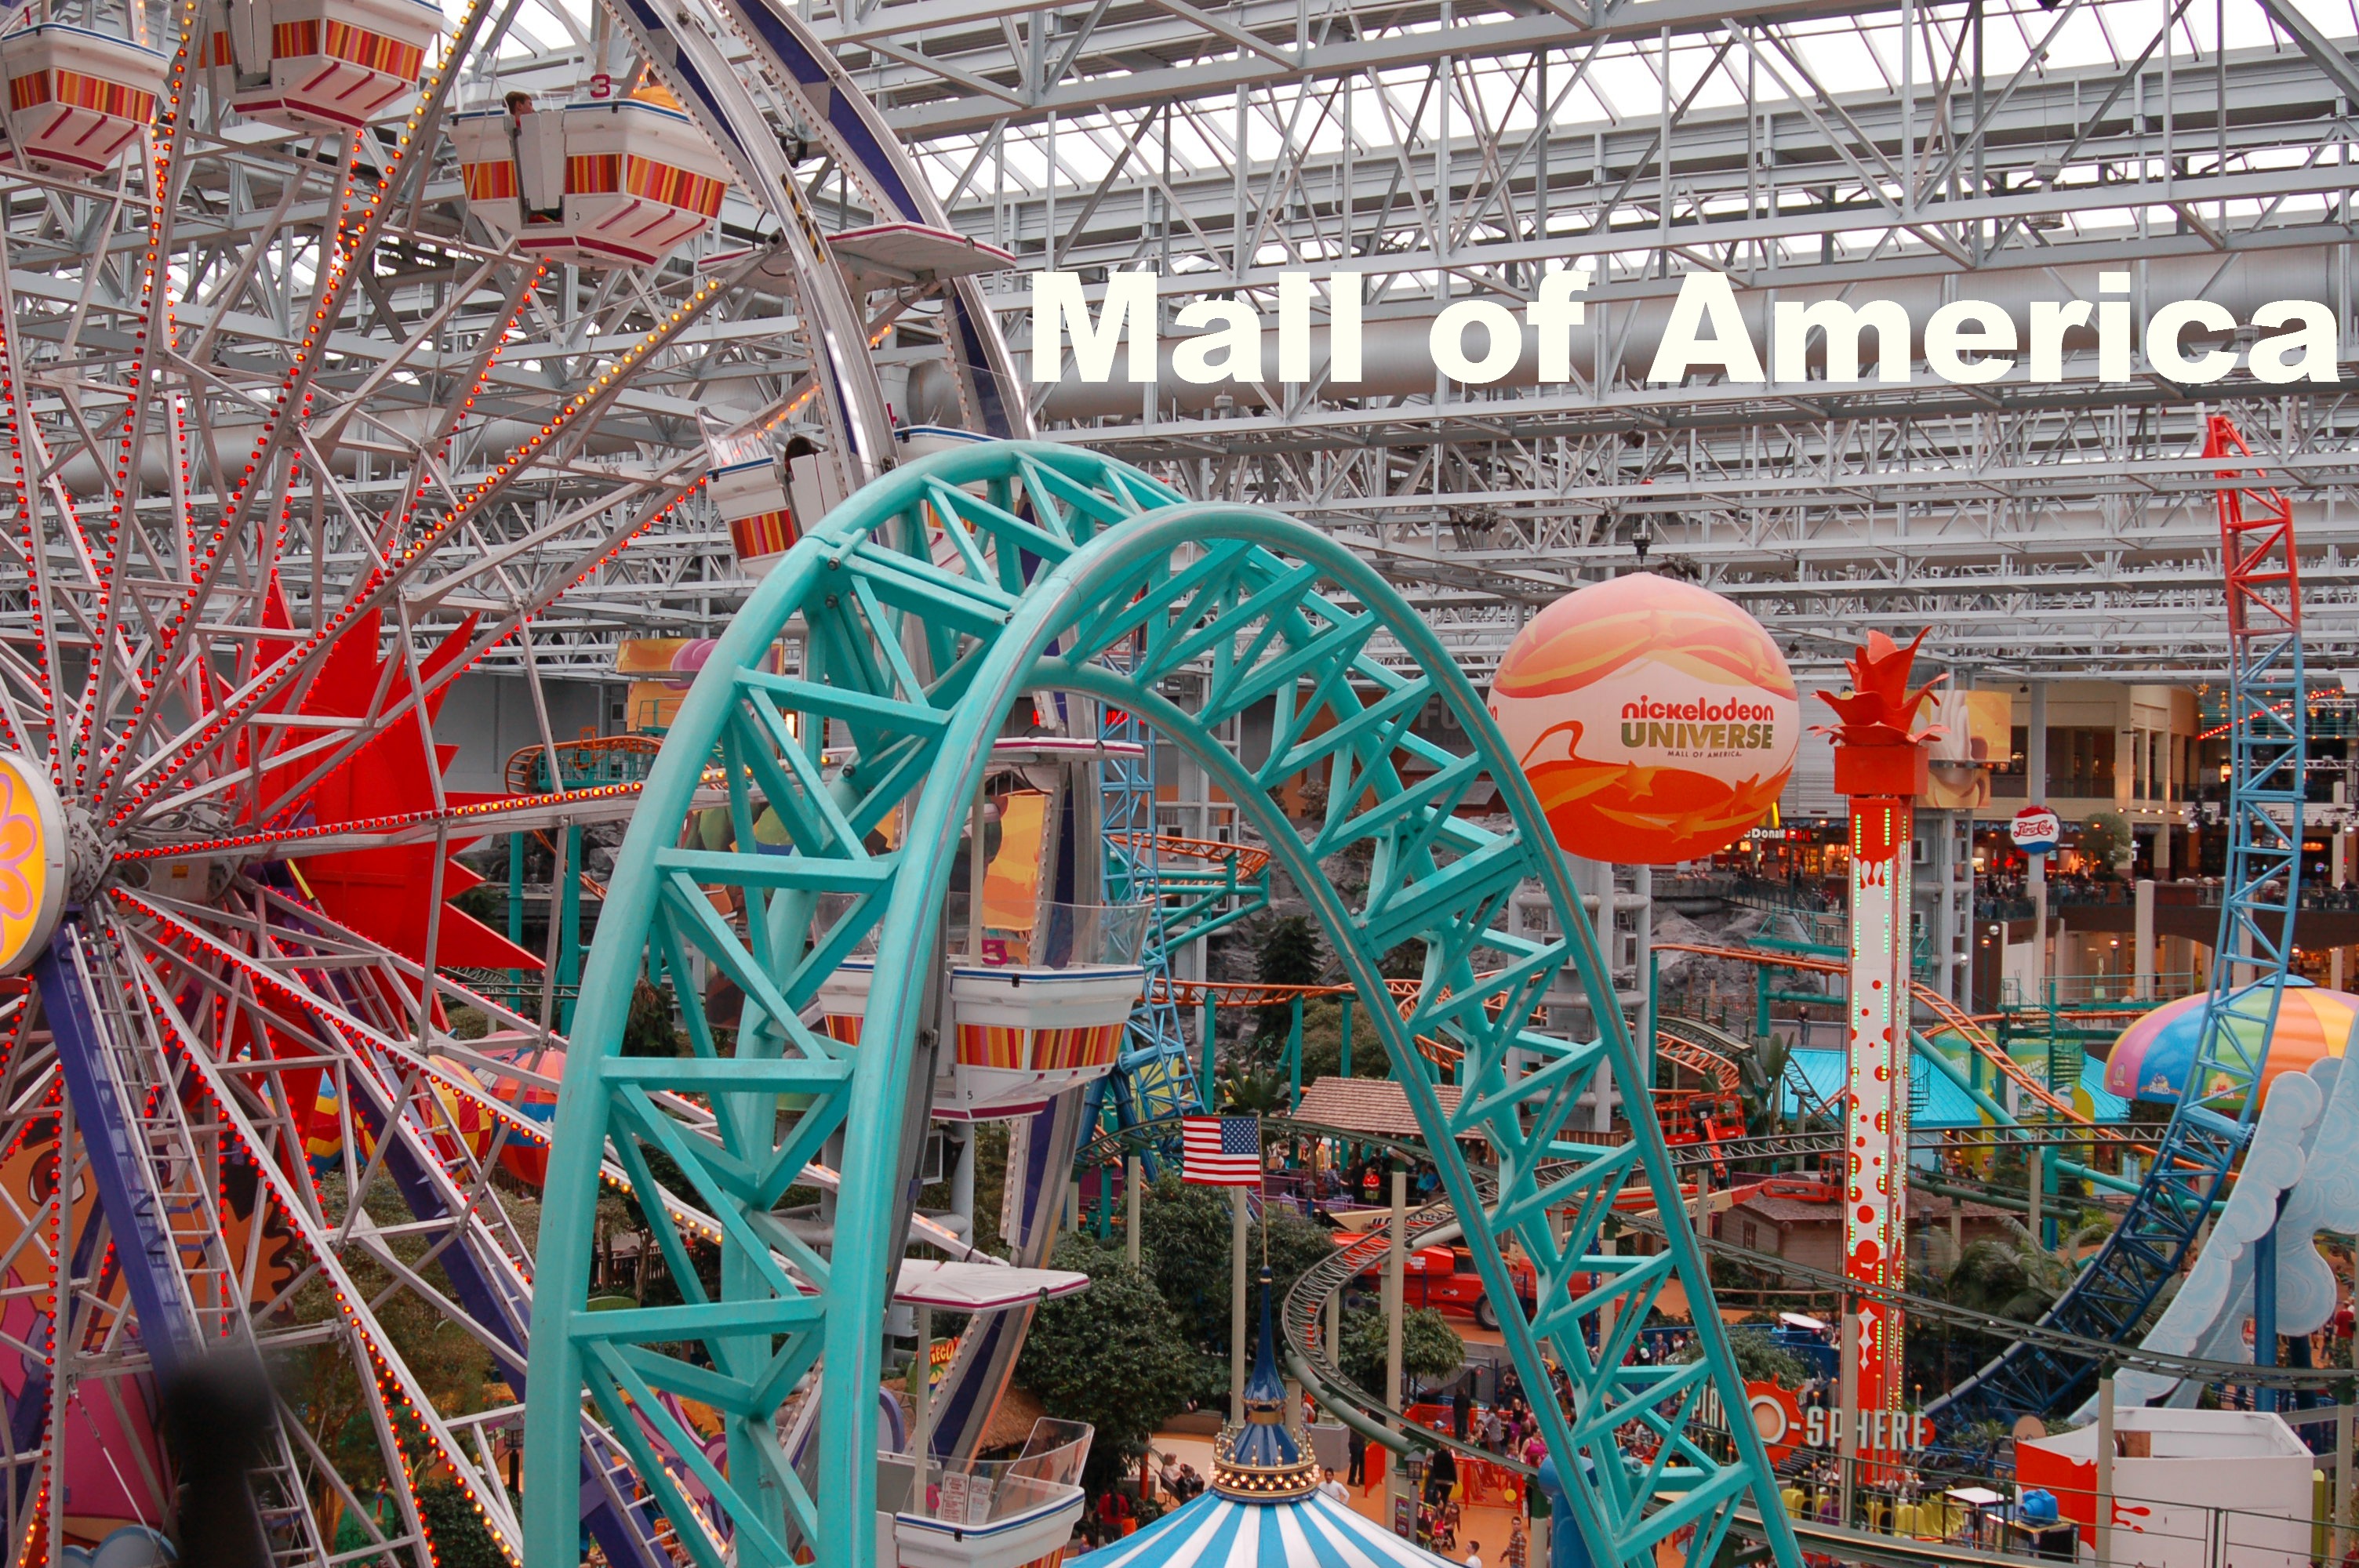 Our Family Trip to Mall of America #MOARocks #EpicRVBloggerTour